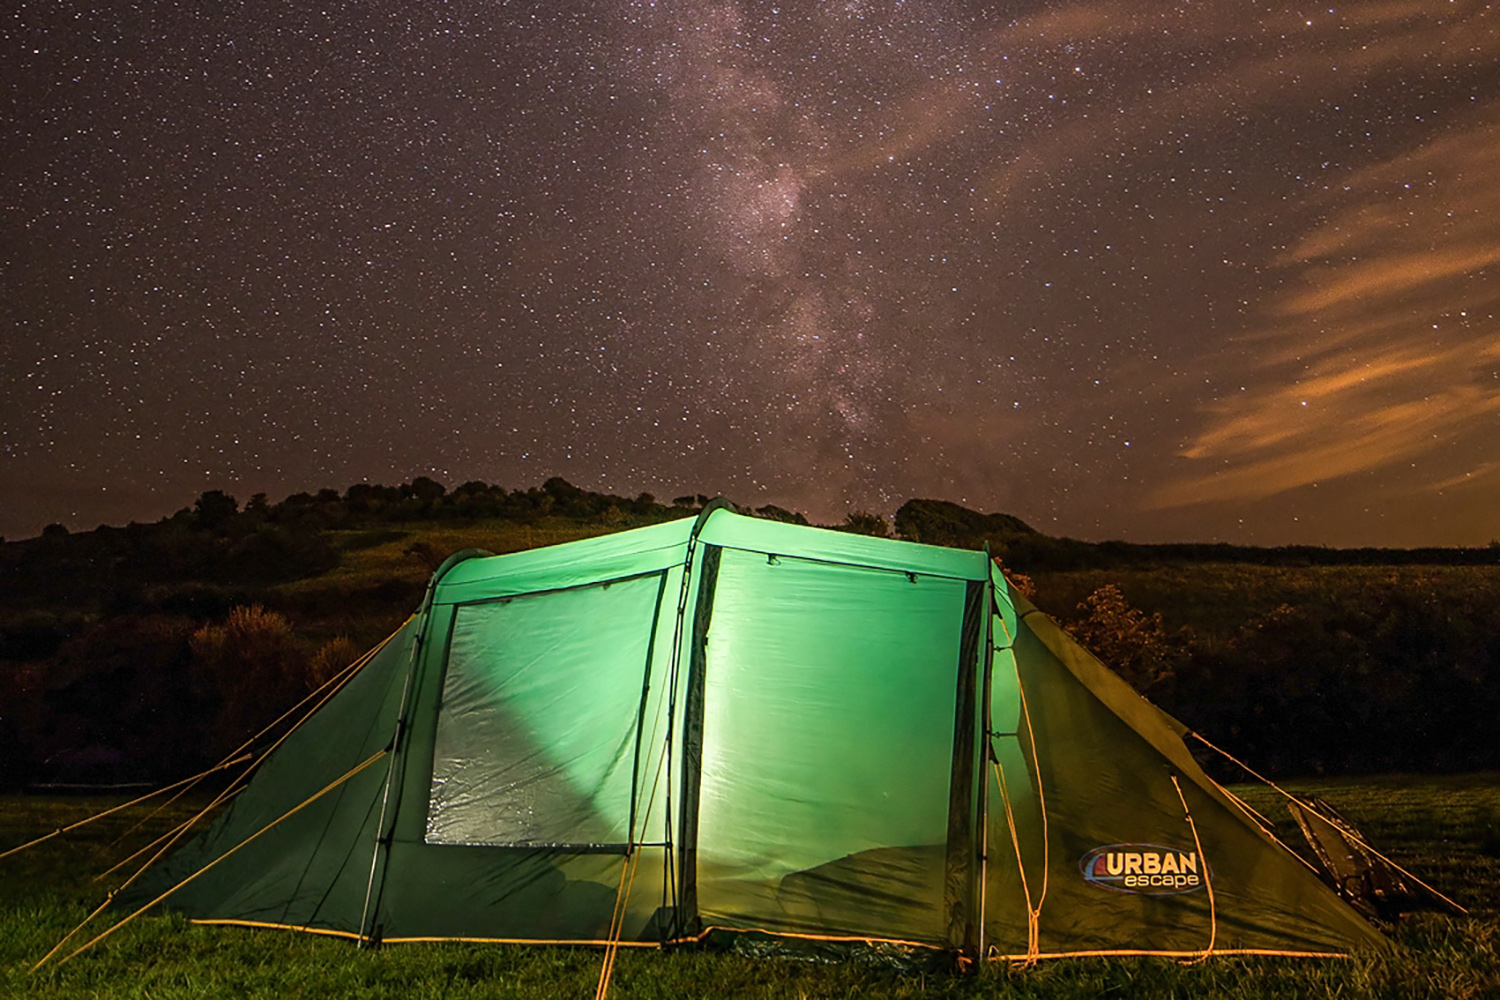 Camping Holidays in Dorset